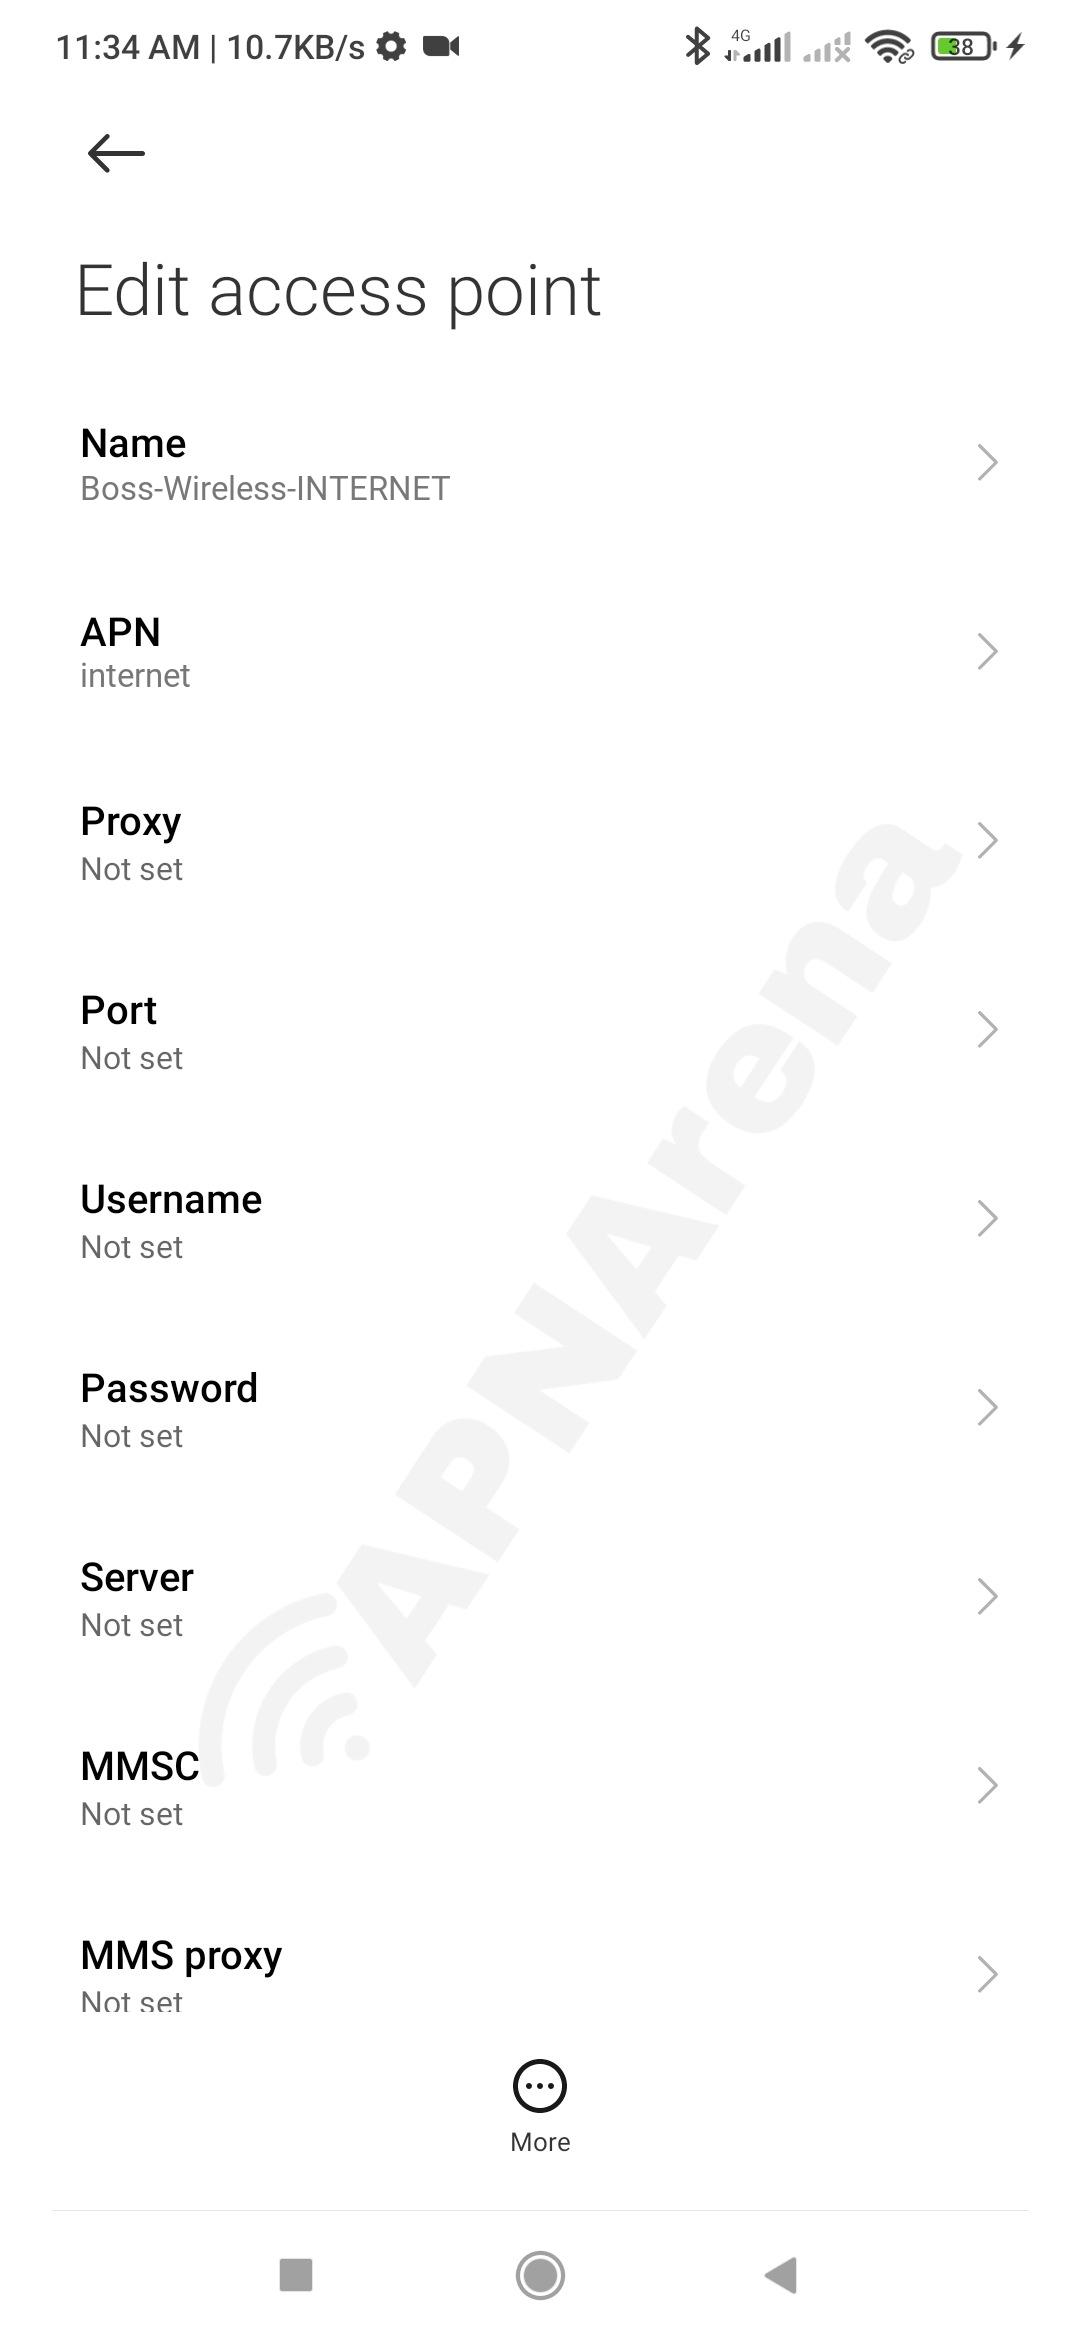 Boss Wireless APN Settings for Android